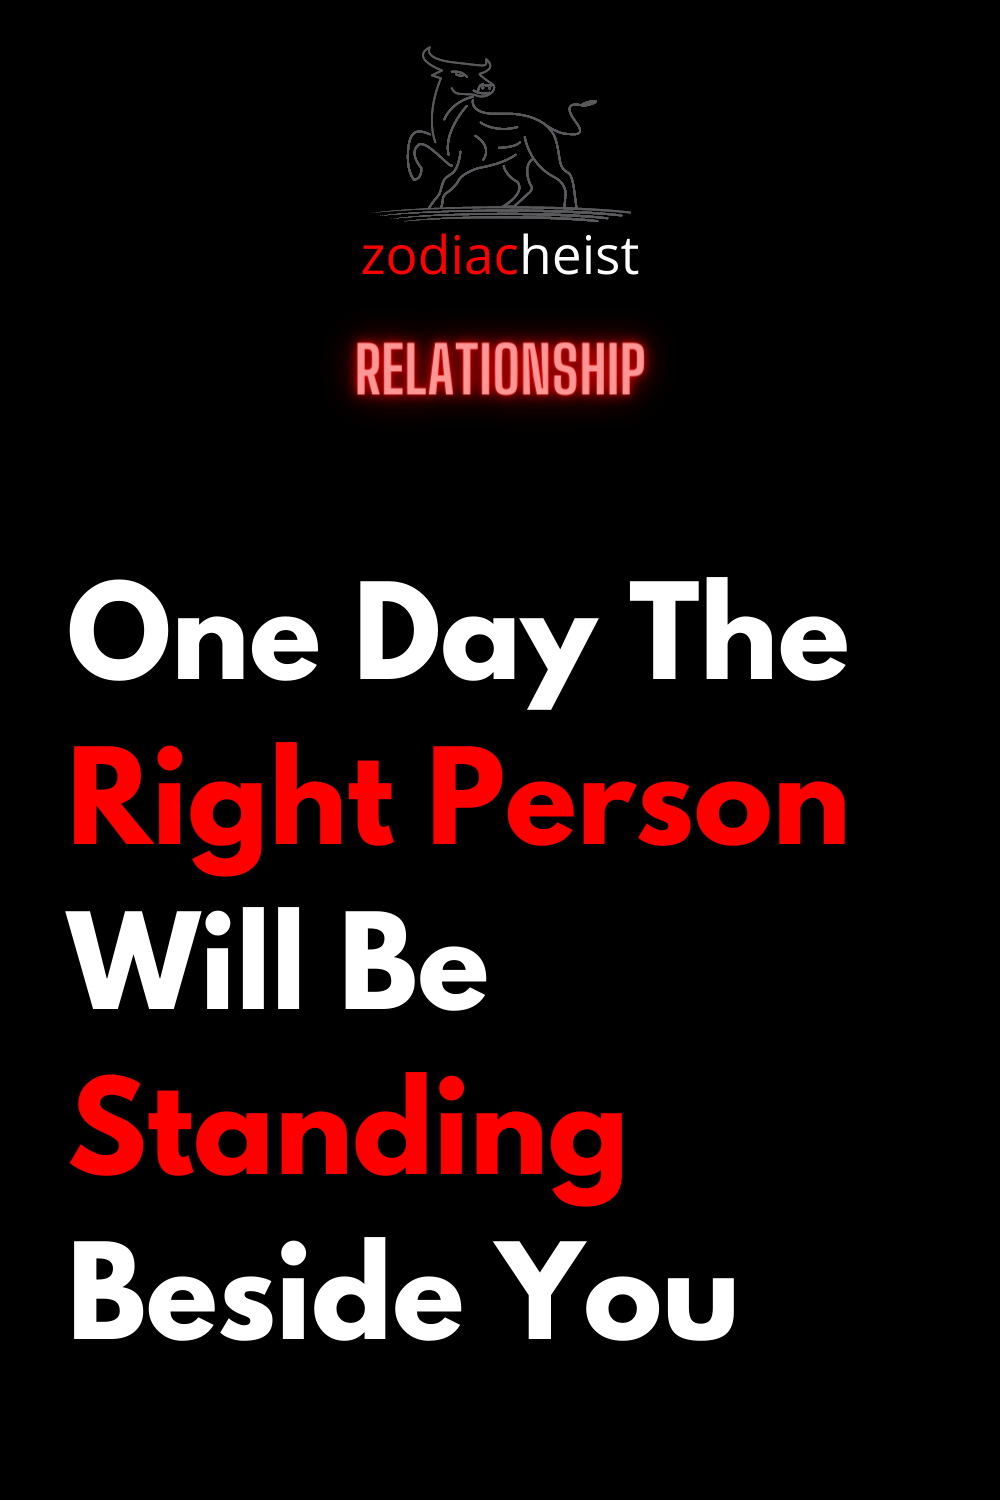 One Day The Right Person Will Be Standing Beside You